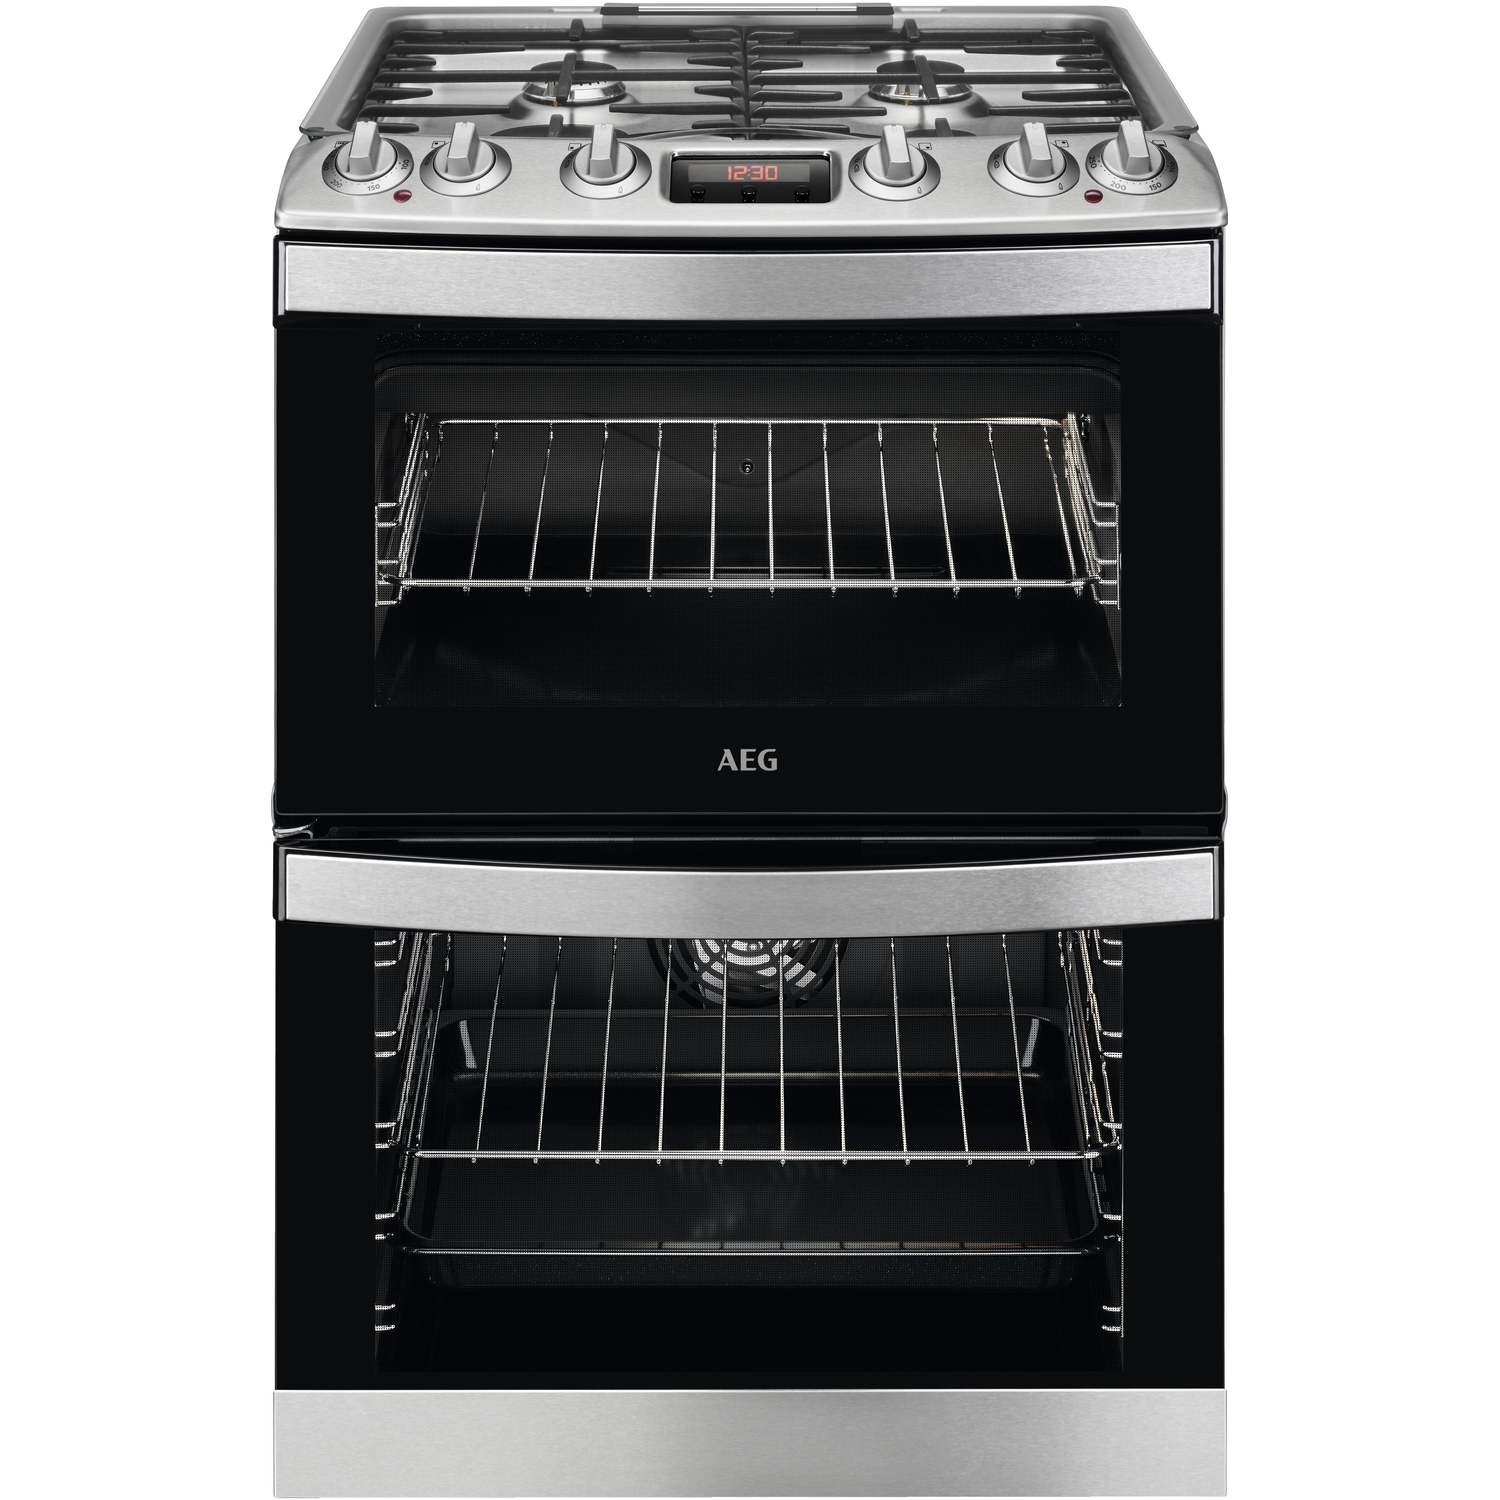 AEG 60cm Double Oven Dual Fuel Cooker with Lid - Stainless Steel